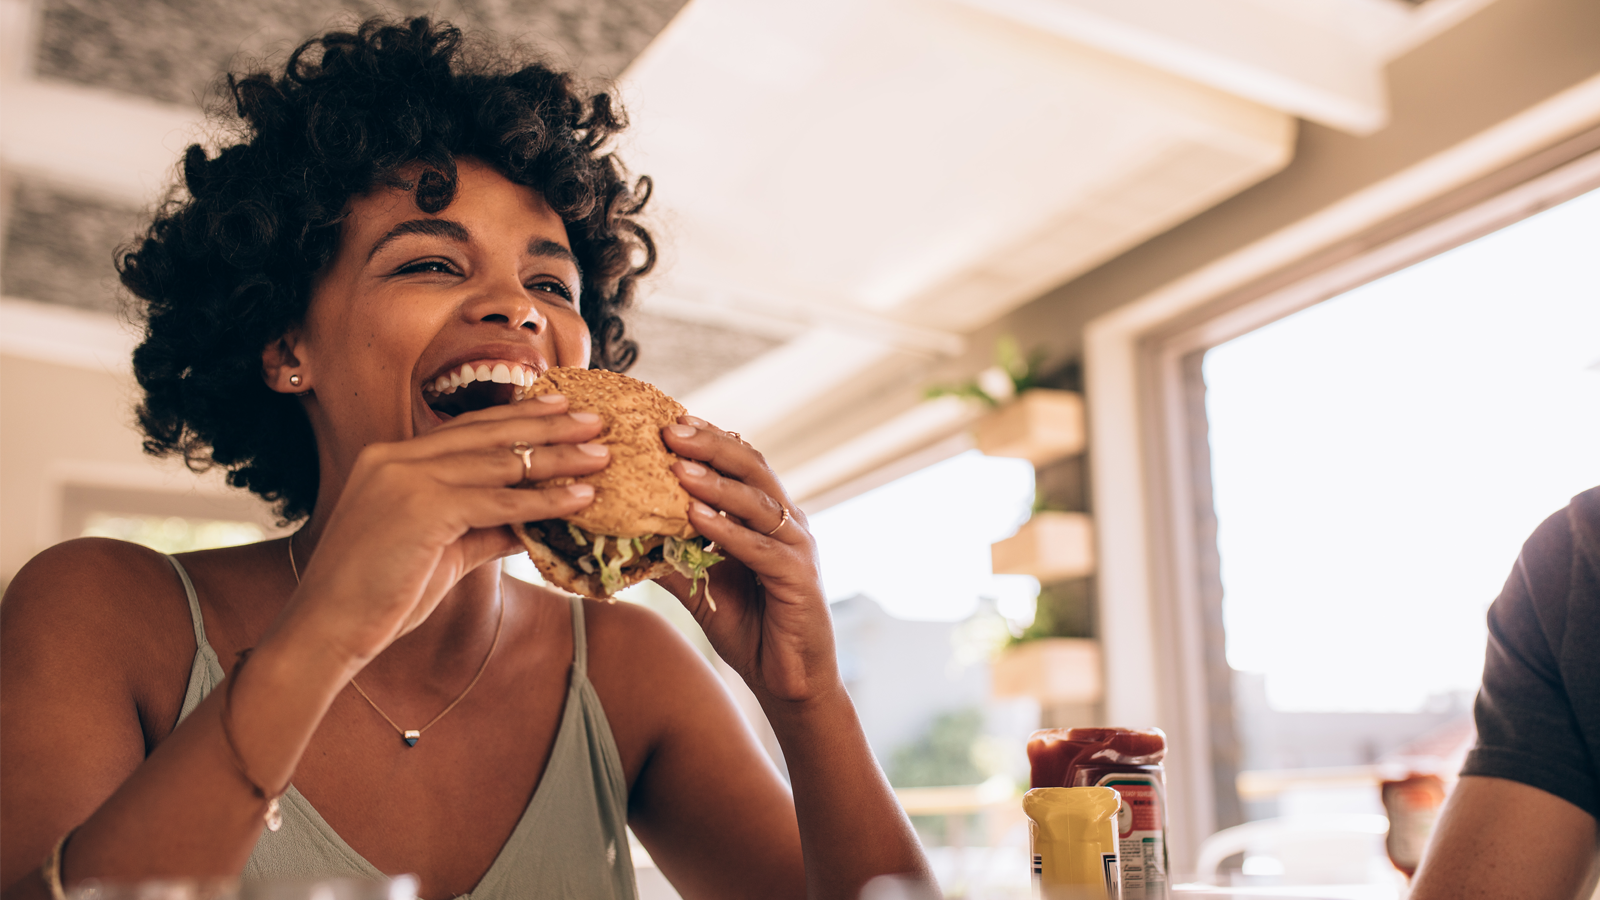 African woman eating stack burger at restaurant with friends.